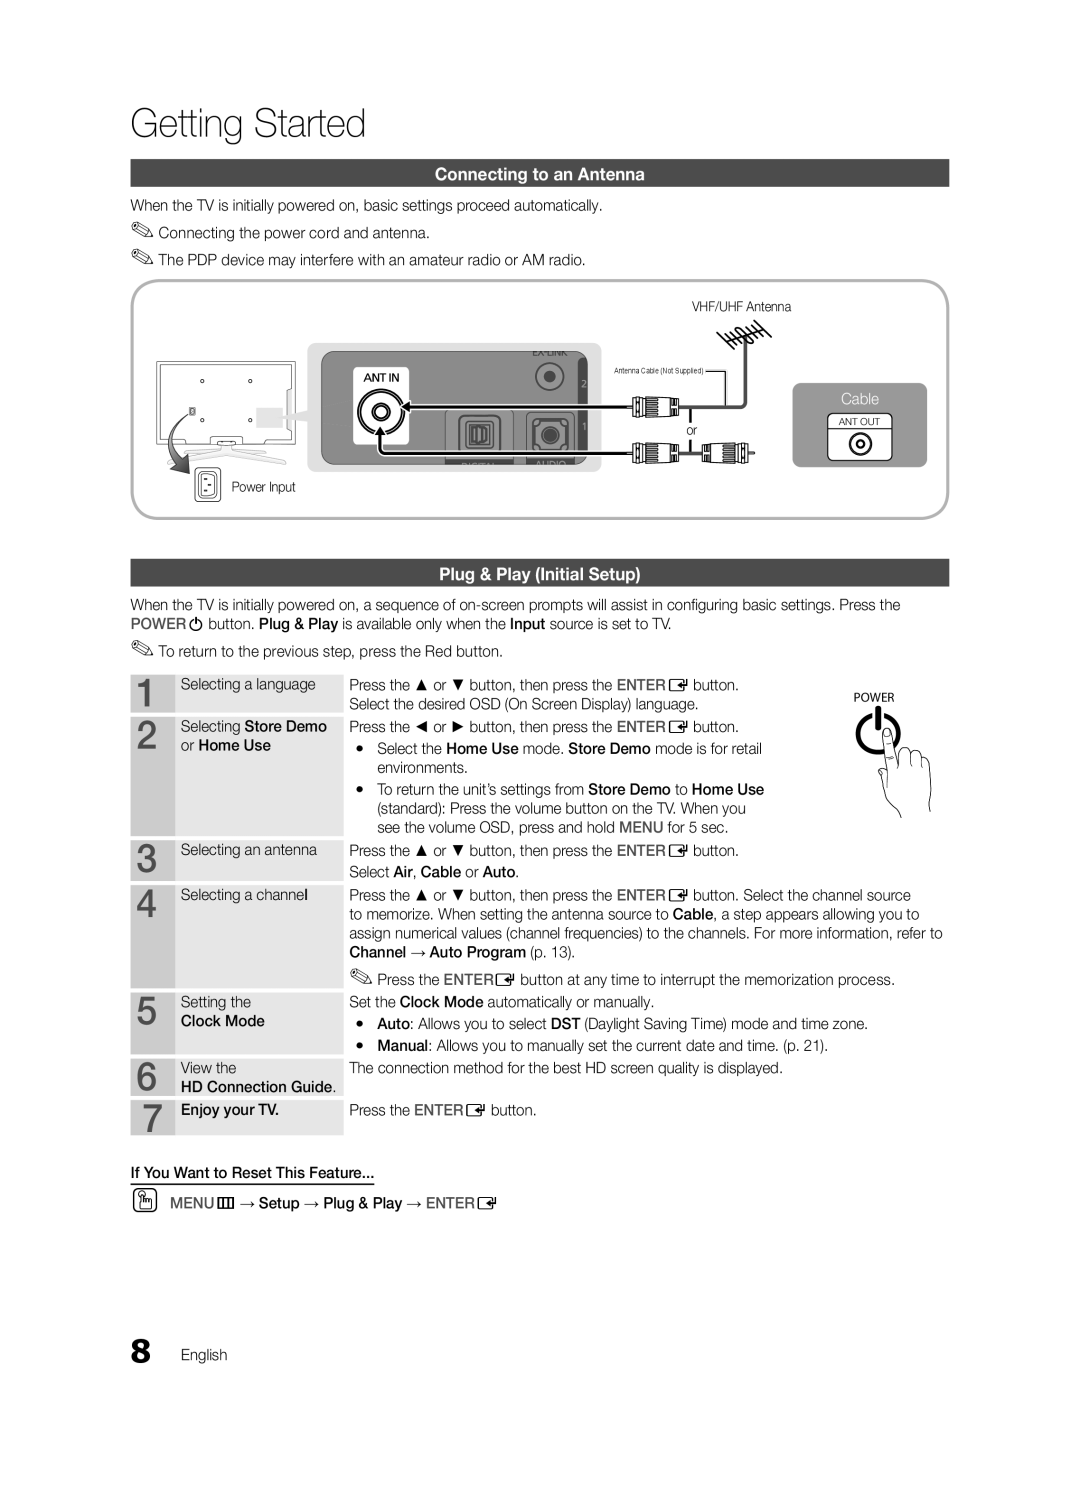 Samsung BN68-03114A-01, PC490-ZA user manual Connecting to an Antenna, Plug & Play Initial Setup, Cable, Getting Started 